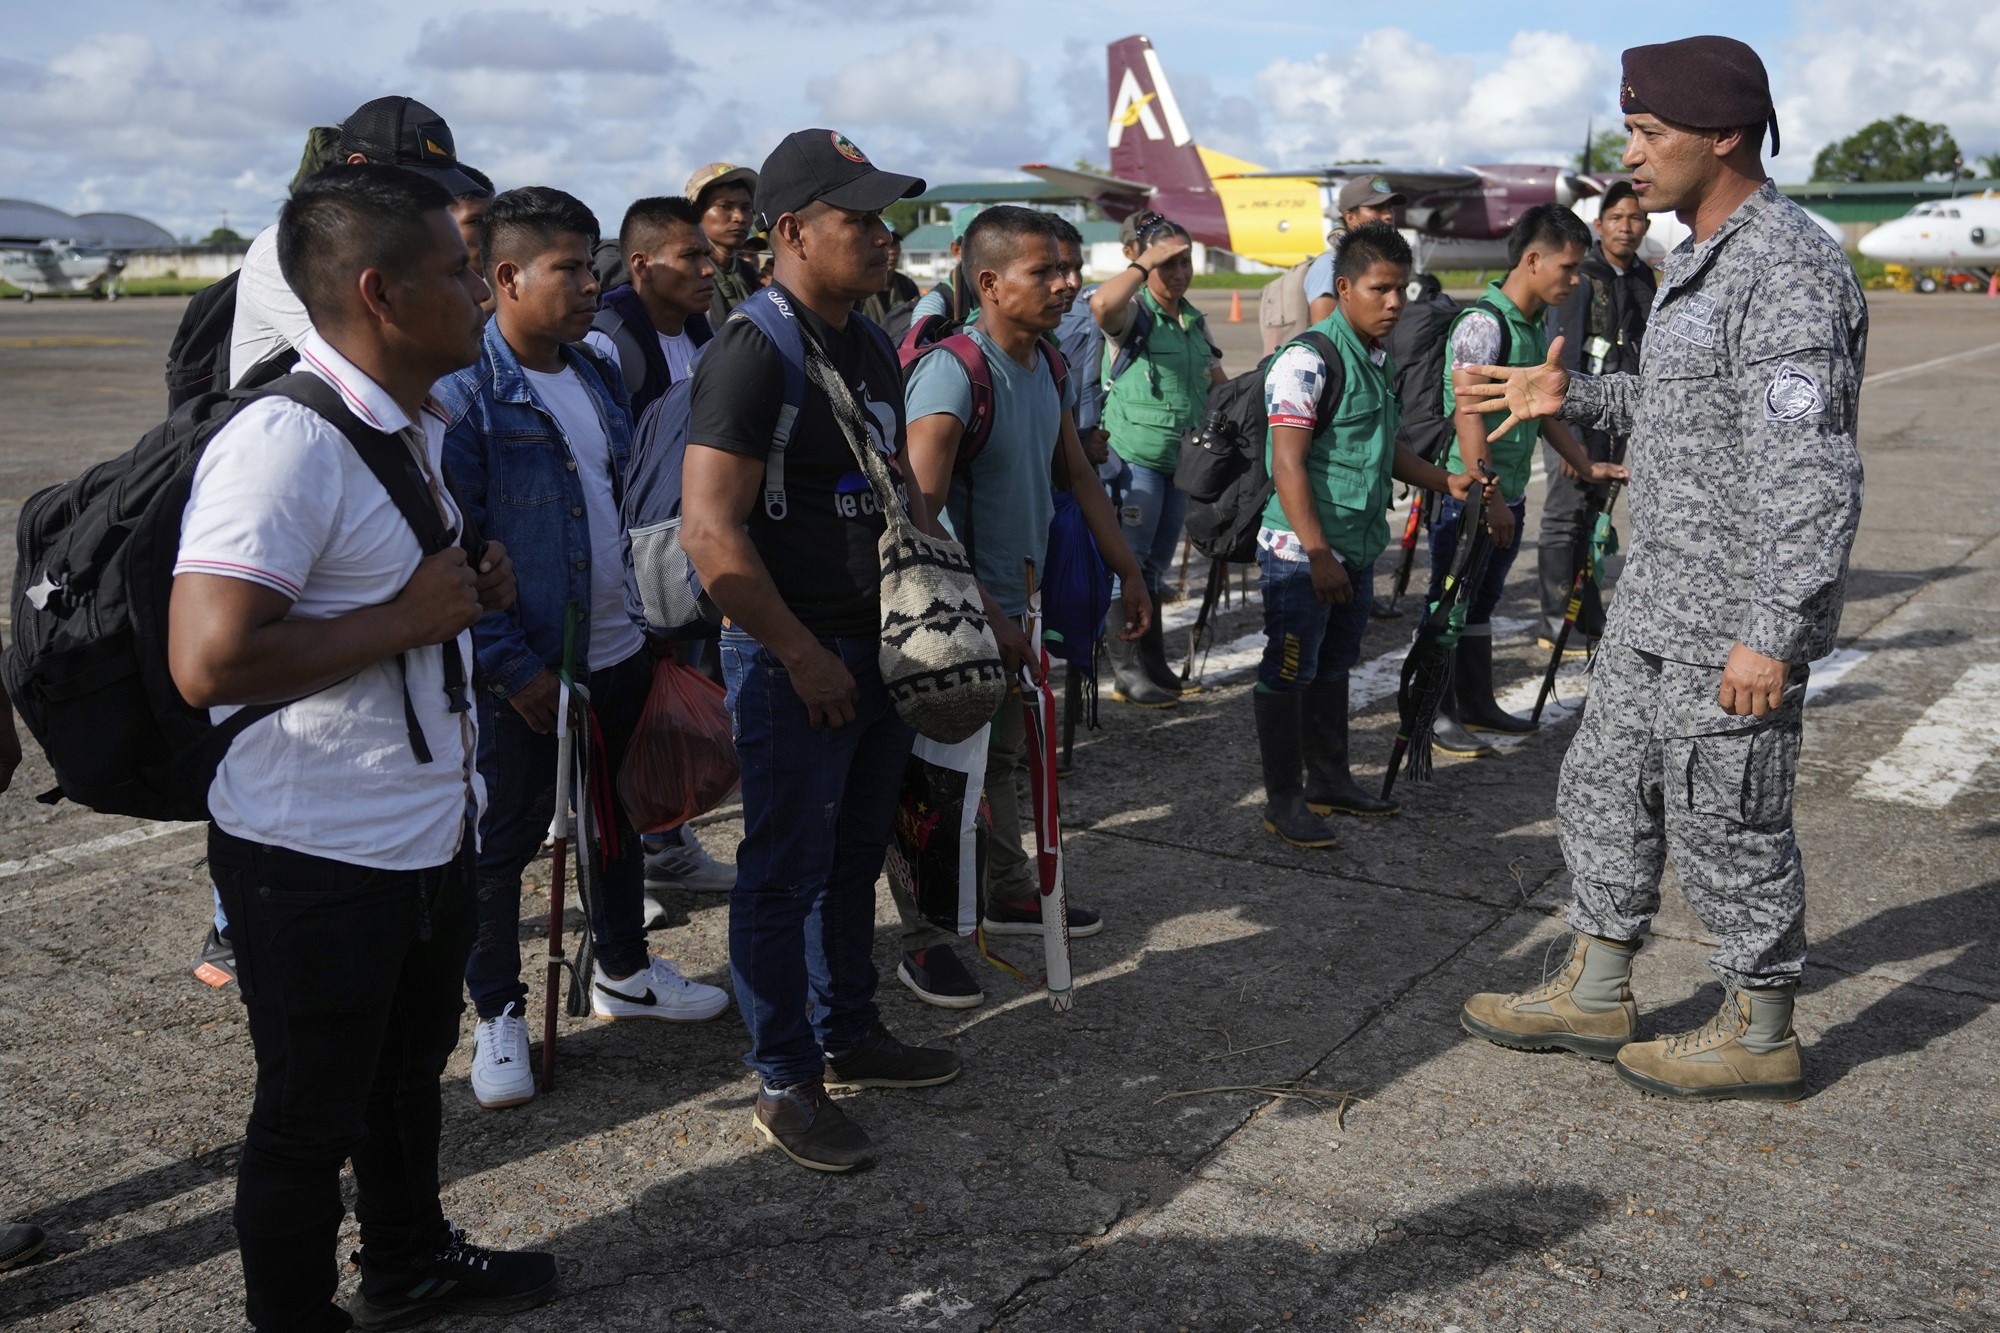 A group of men with bags speaking to a man in military uniform on the tarmac of an airport